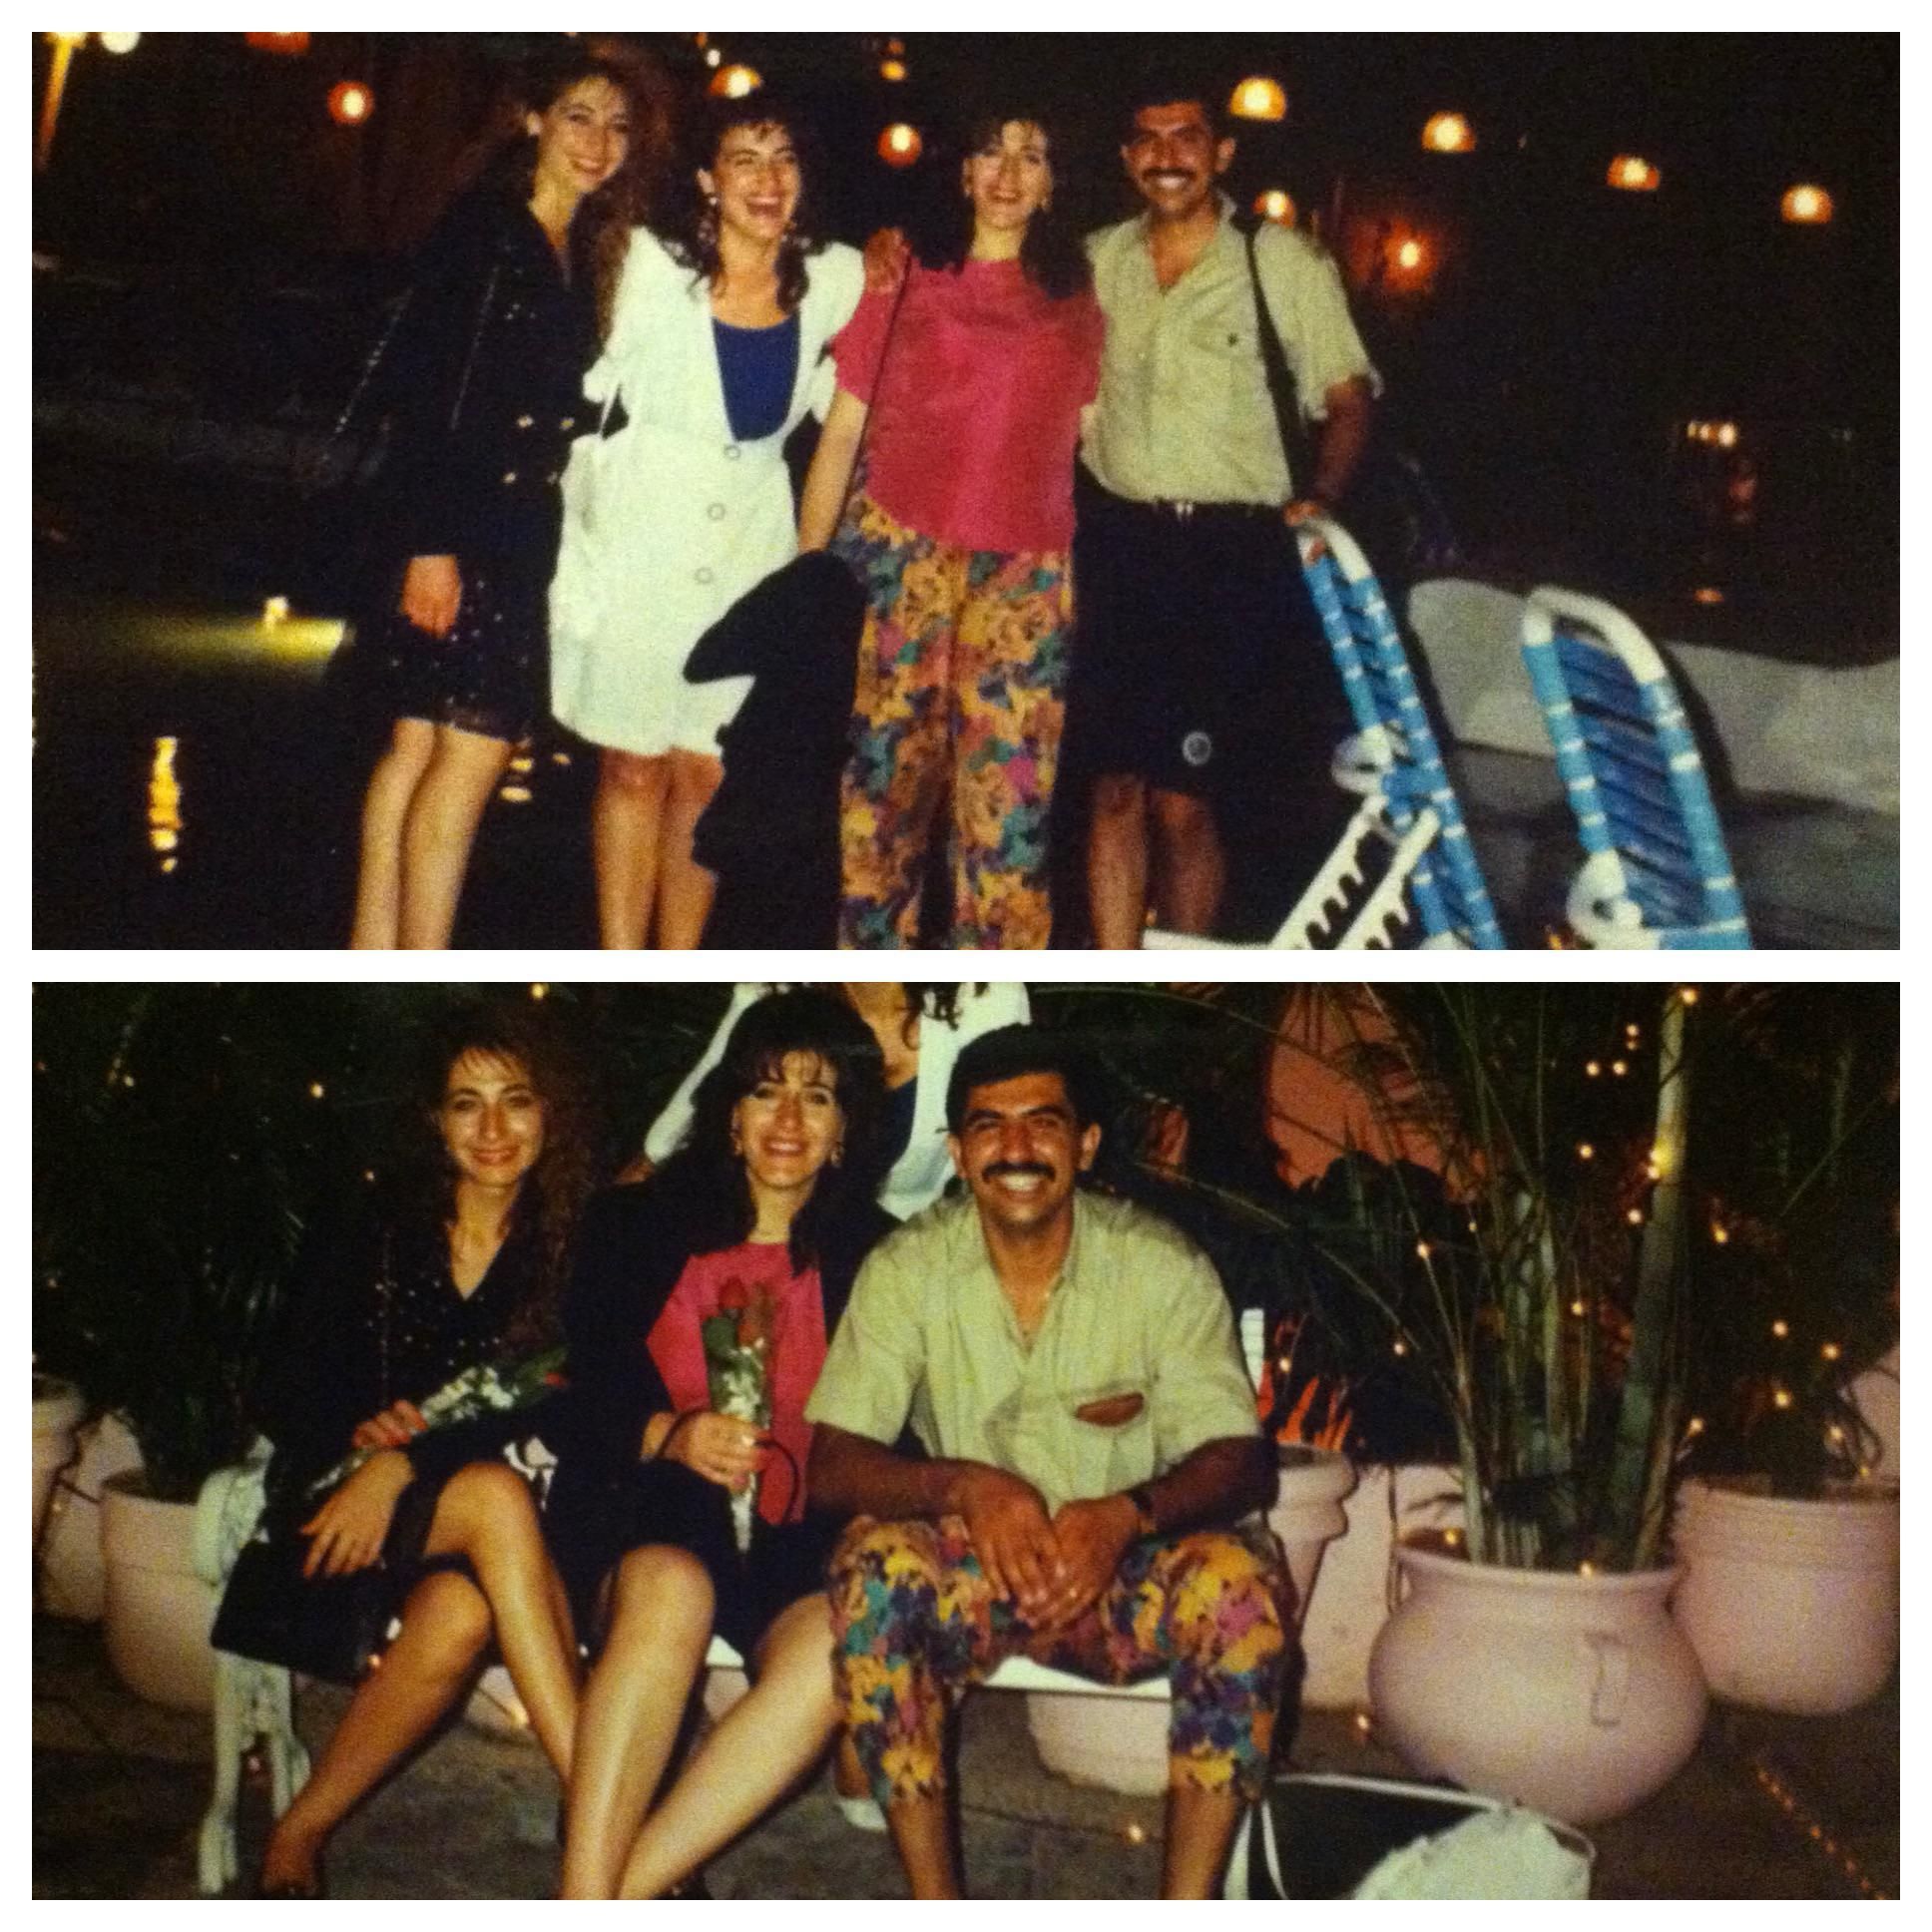 1988: My dad was denied entry to a club in Mexico bc he was wearing shorts so my mom gave him her pants